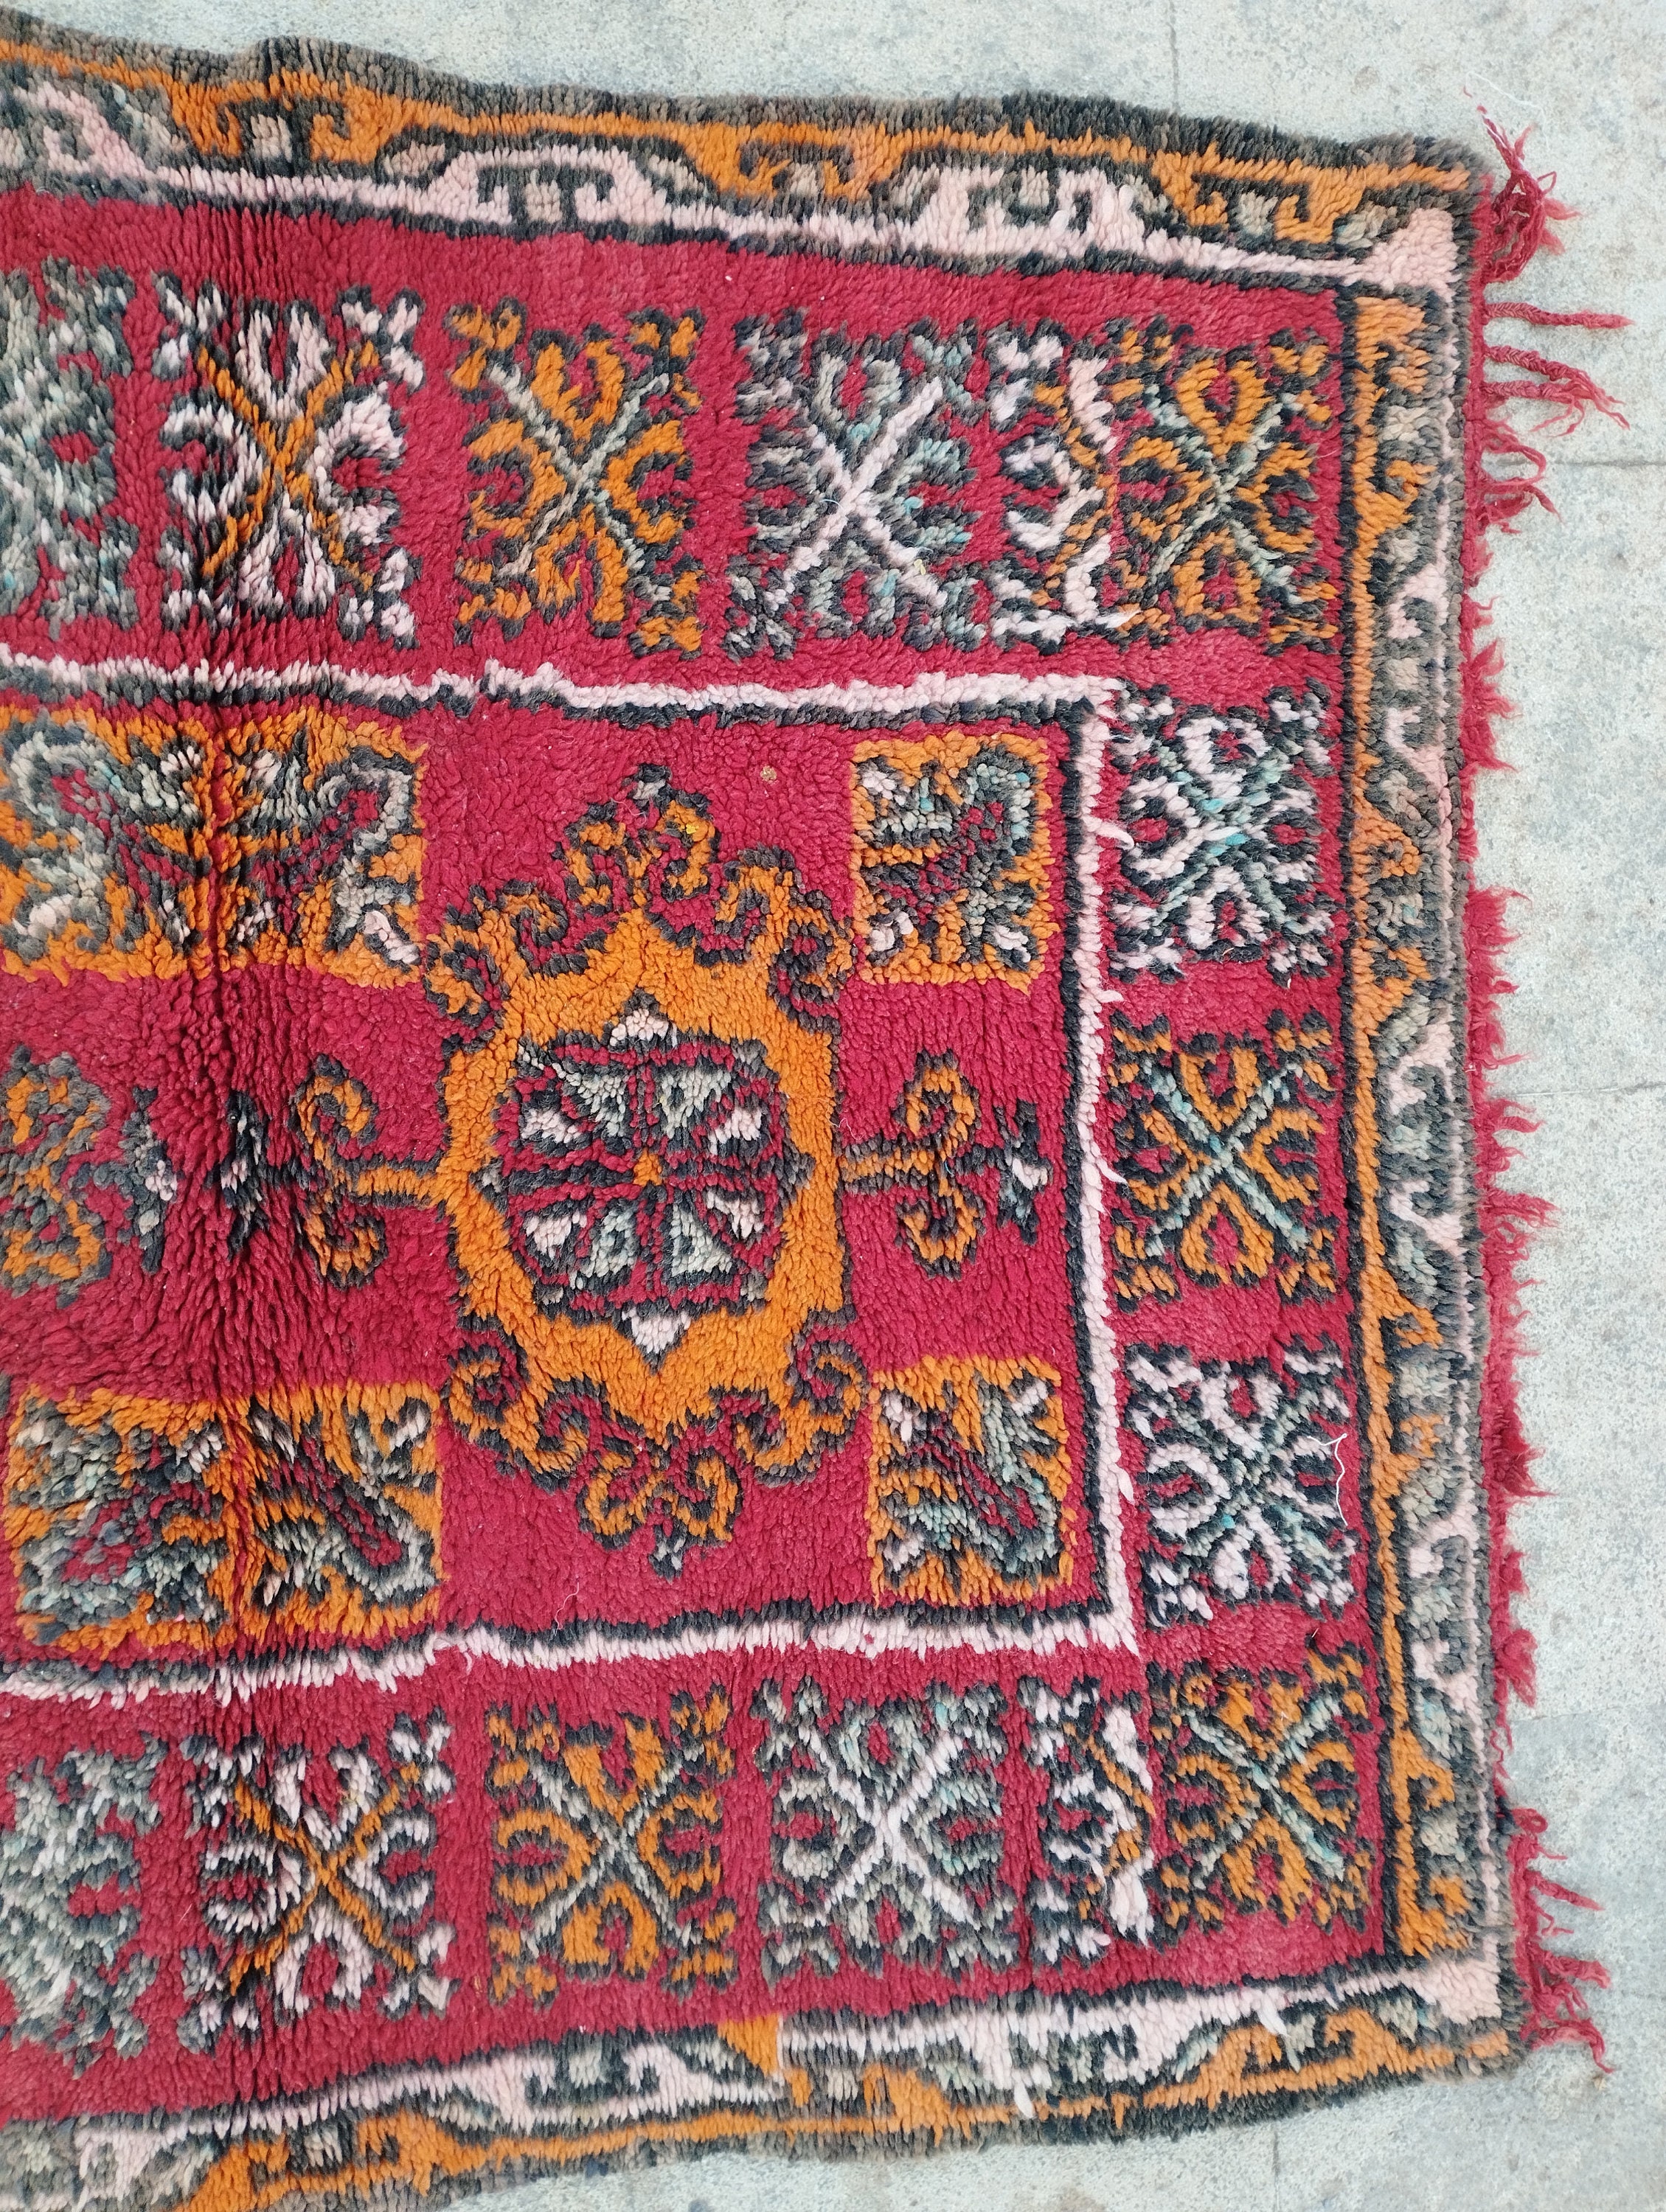 4x3 Ft Vintage Area Rug Moroccan Old Rare Rugs, Berber Faded Red Rug, Woven  Berber Area Rug, Moroccan Red Rug, Moroccan Vintage Unique Rugs 